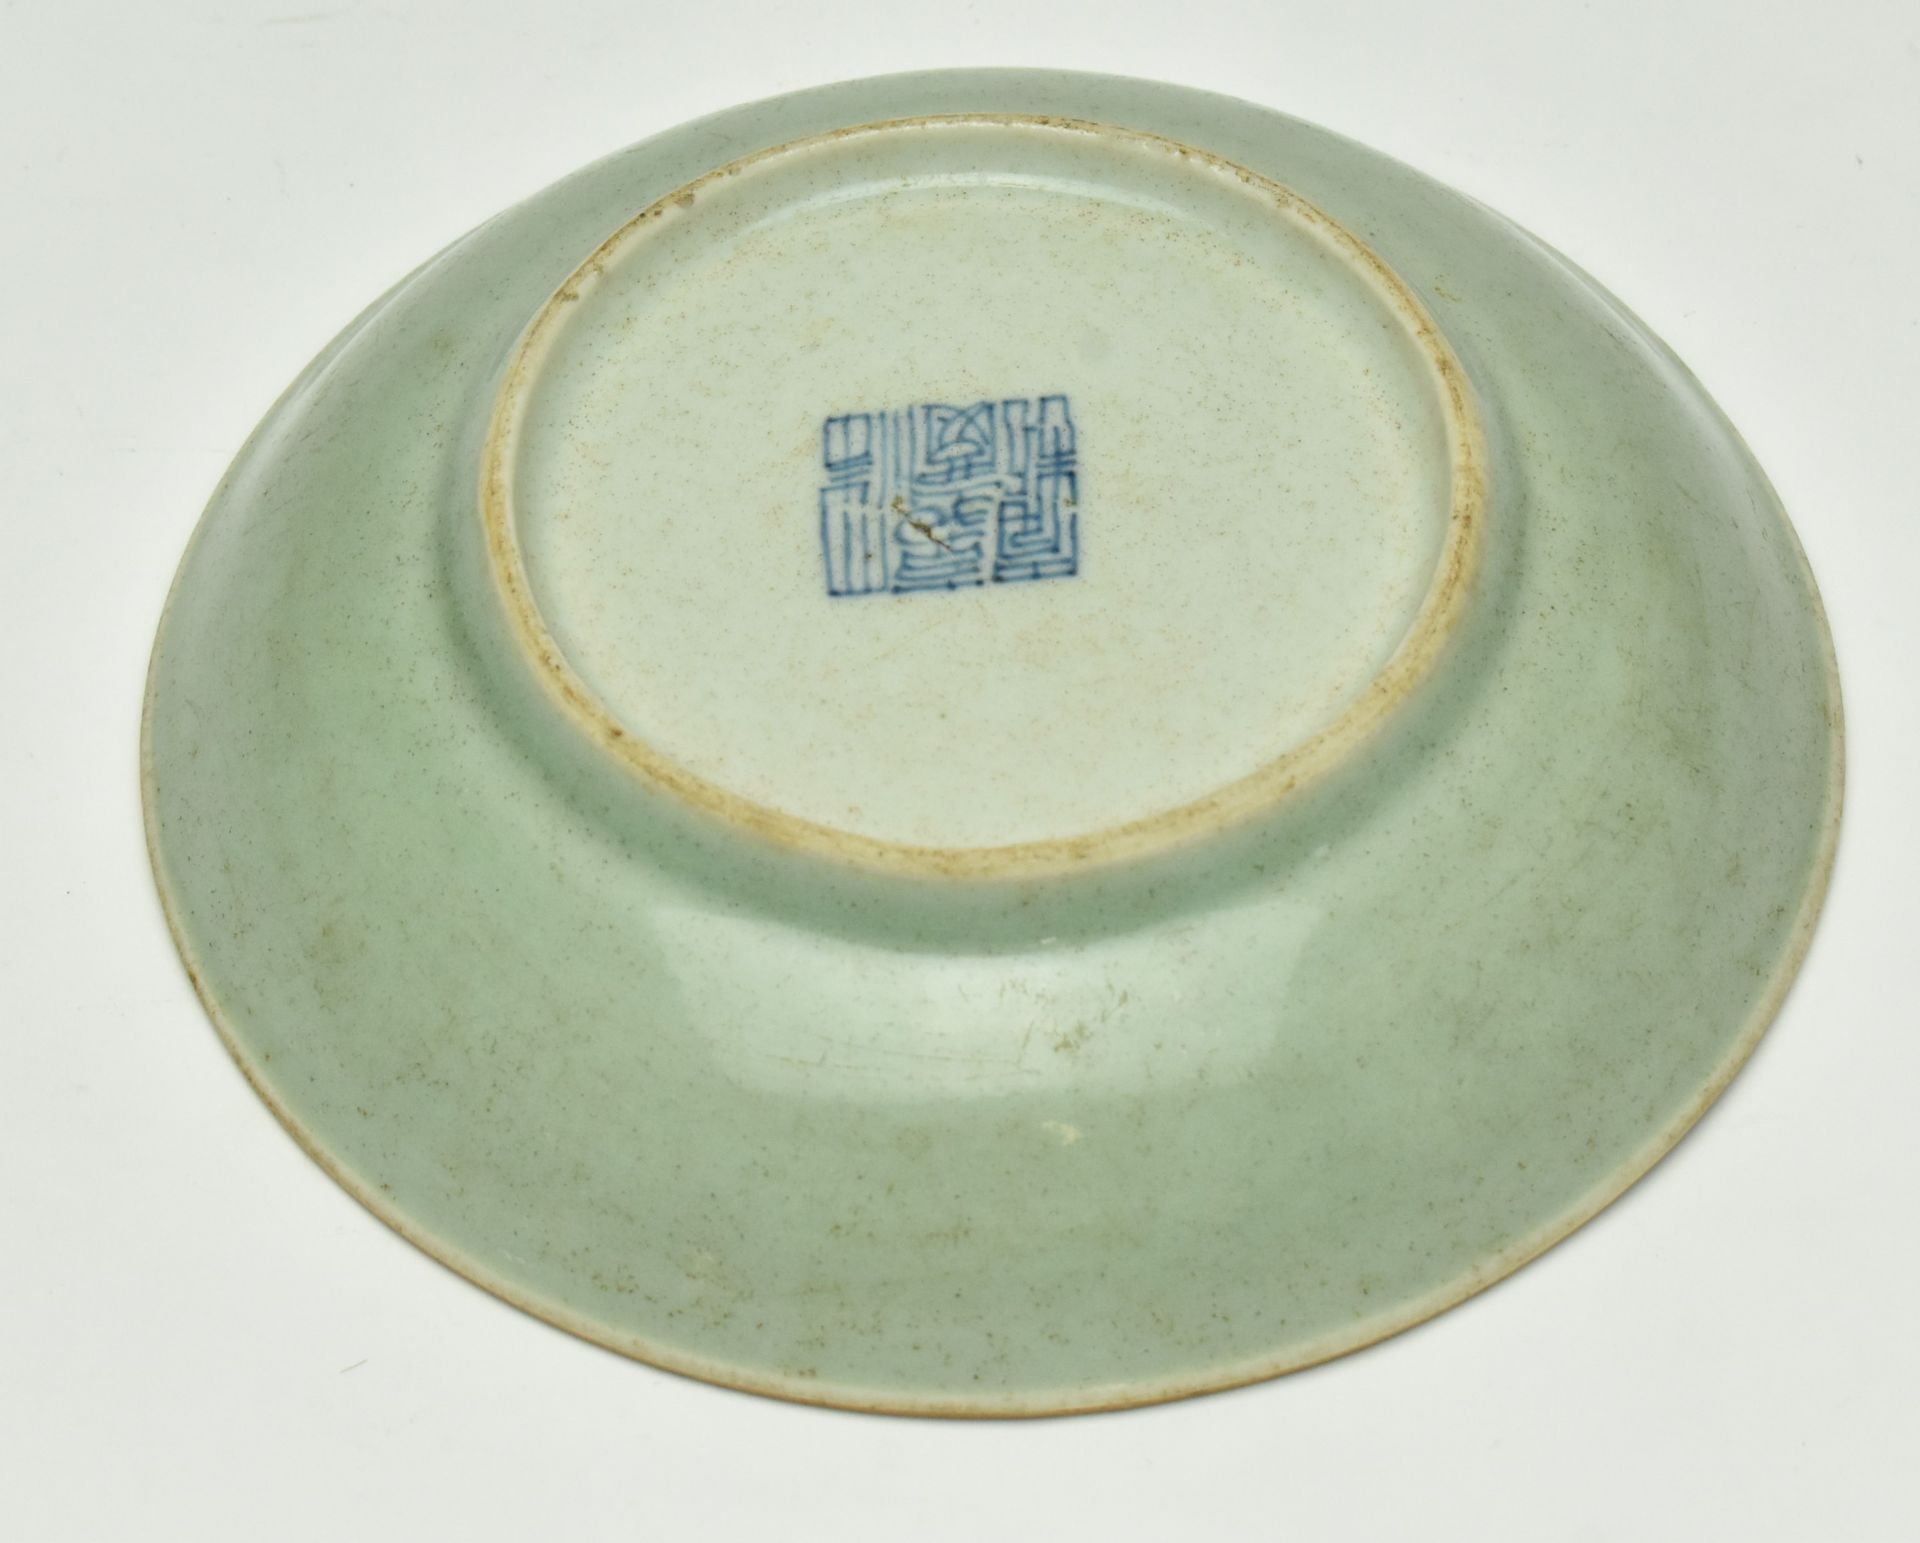 TWO QING DYNASTY CELADON GLAZED DISHES 清 青釉 盘子两个 - Image 7 of 7